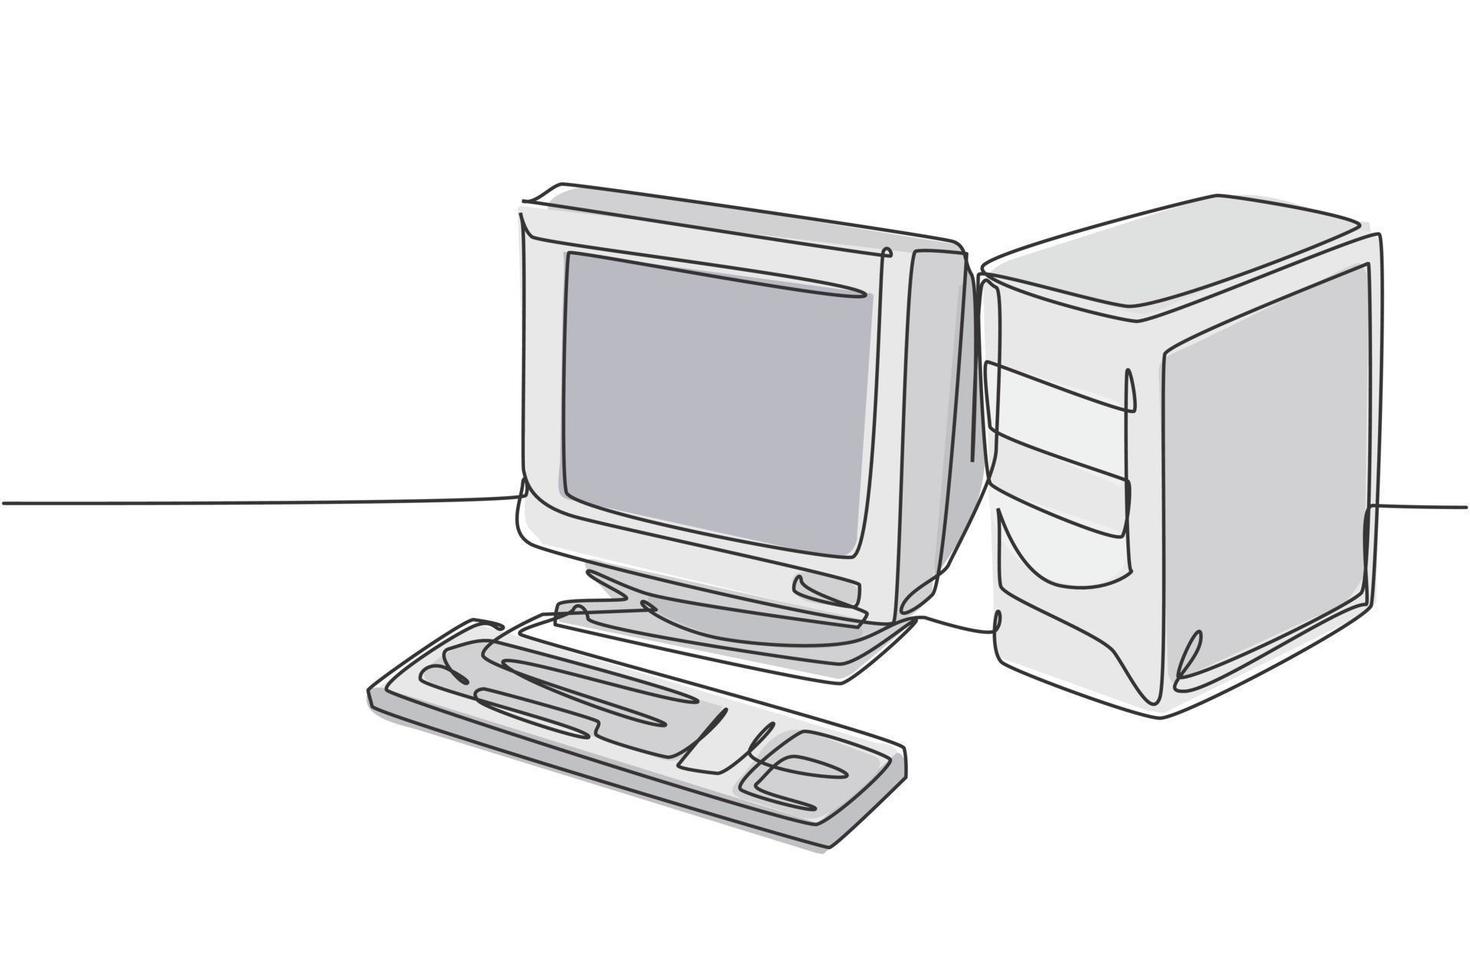 Single continuous line drawing of of retro old classic personal computer processor unit. Vintage cpu with analog monitor and keyboard item concept one line draw design vector illustration graphic